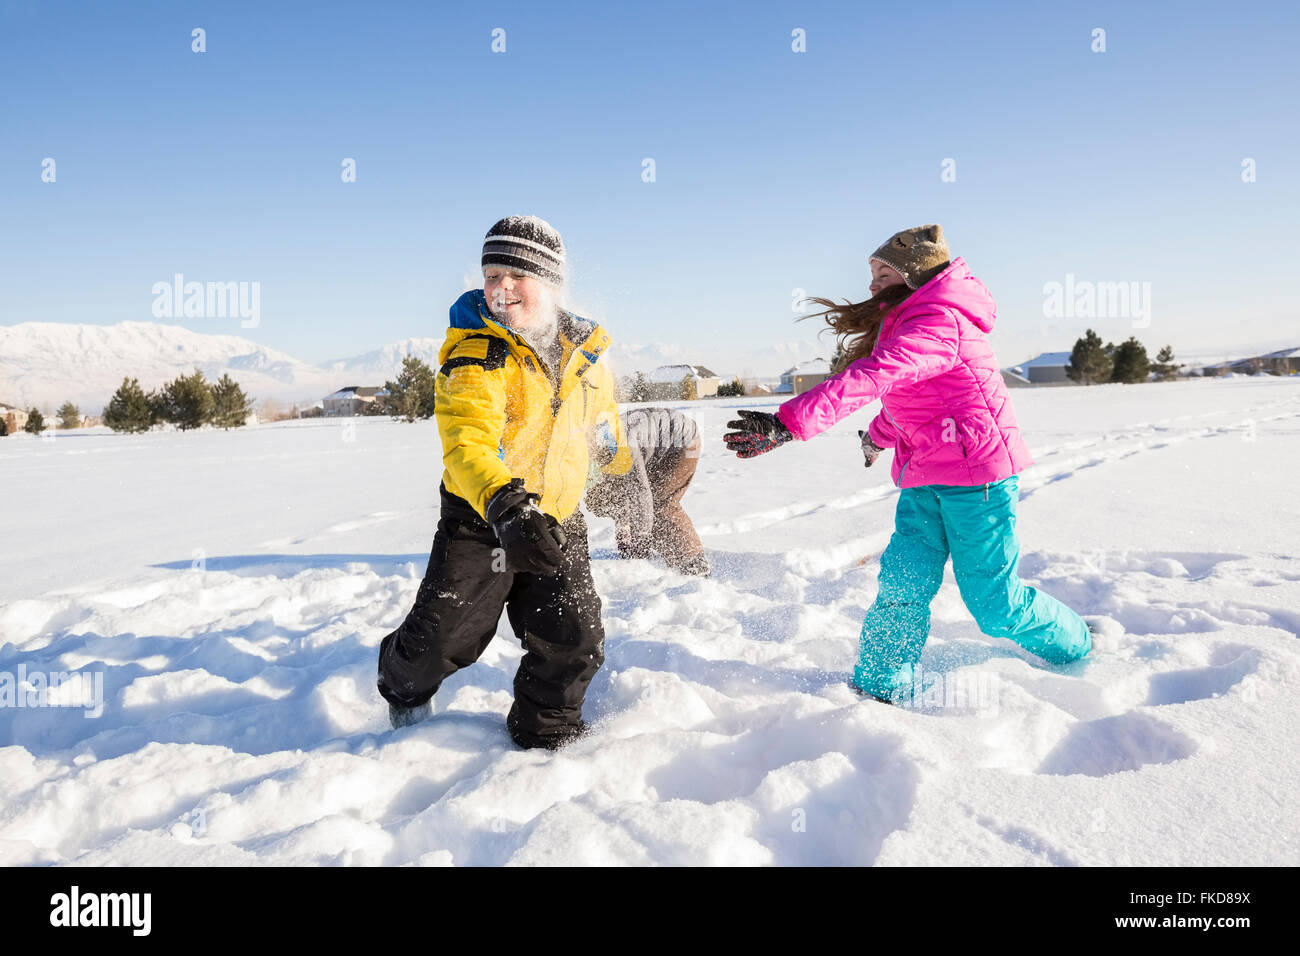 Children (8-9, 10-11) playing in snow Stock Photo